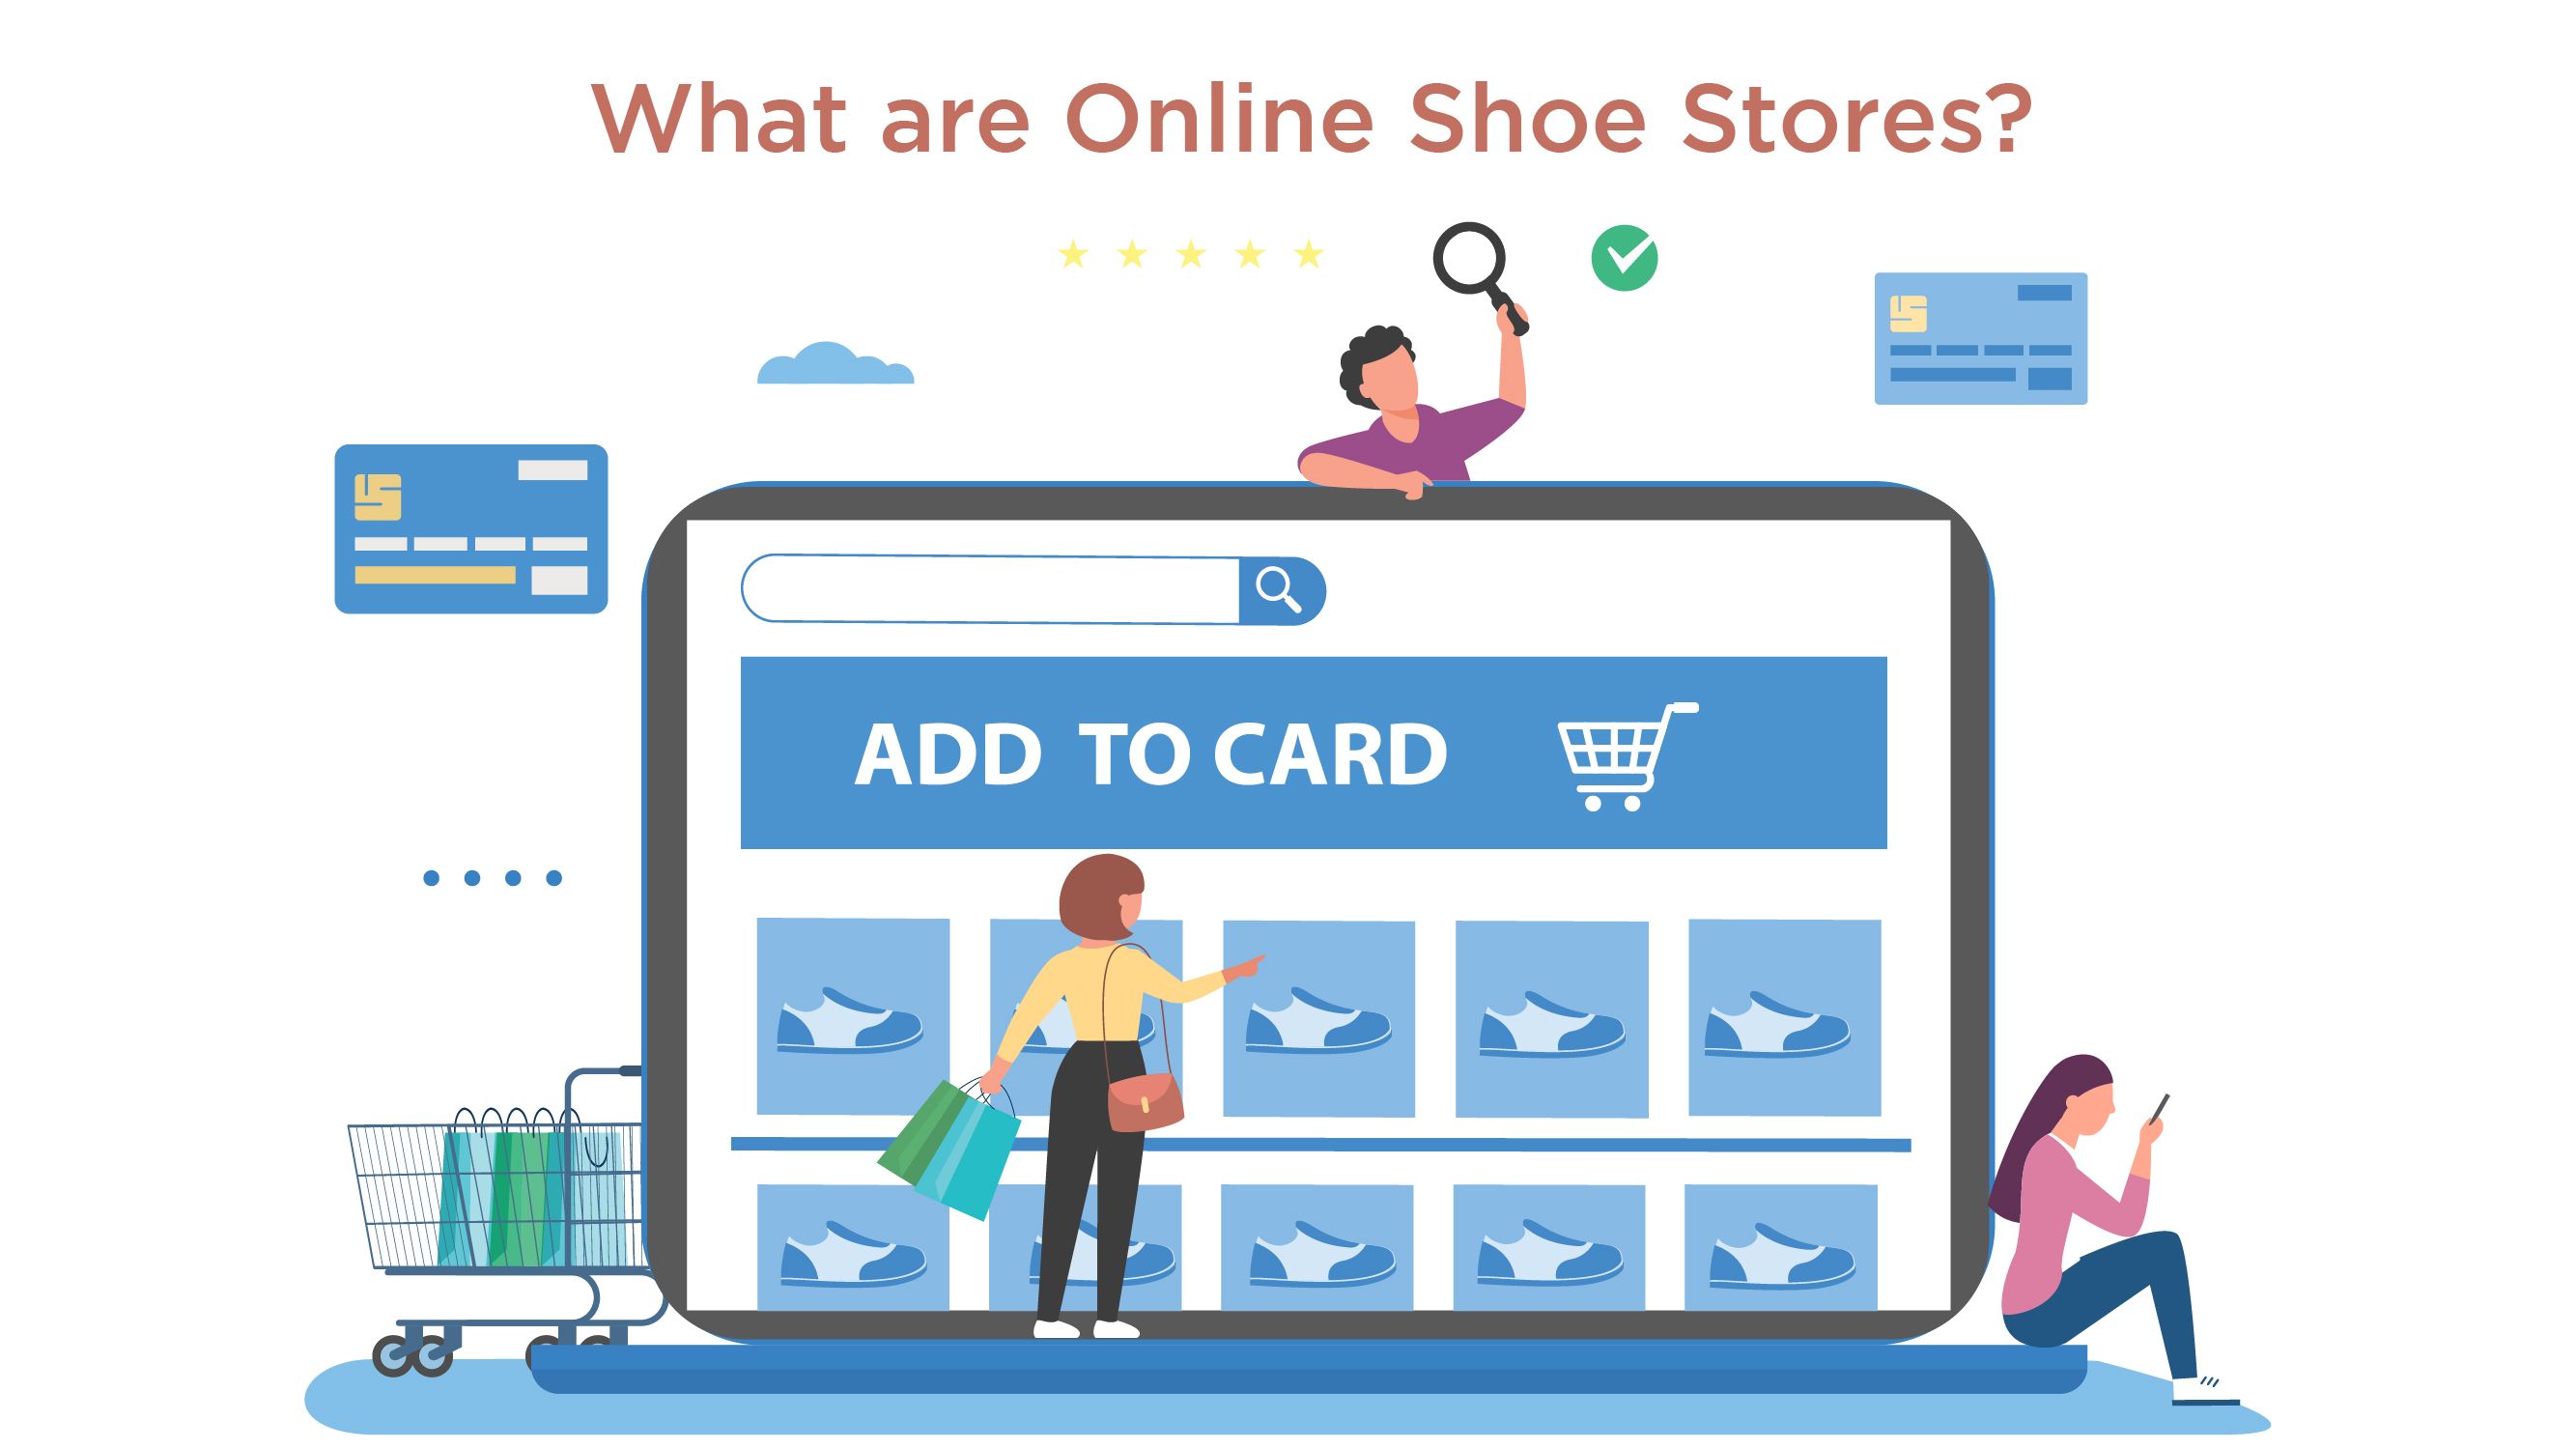 What are online shoe stores?